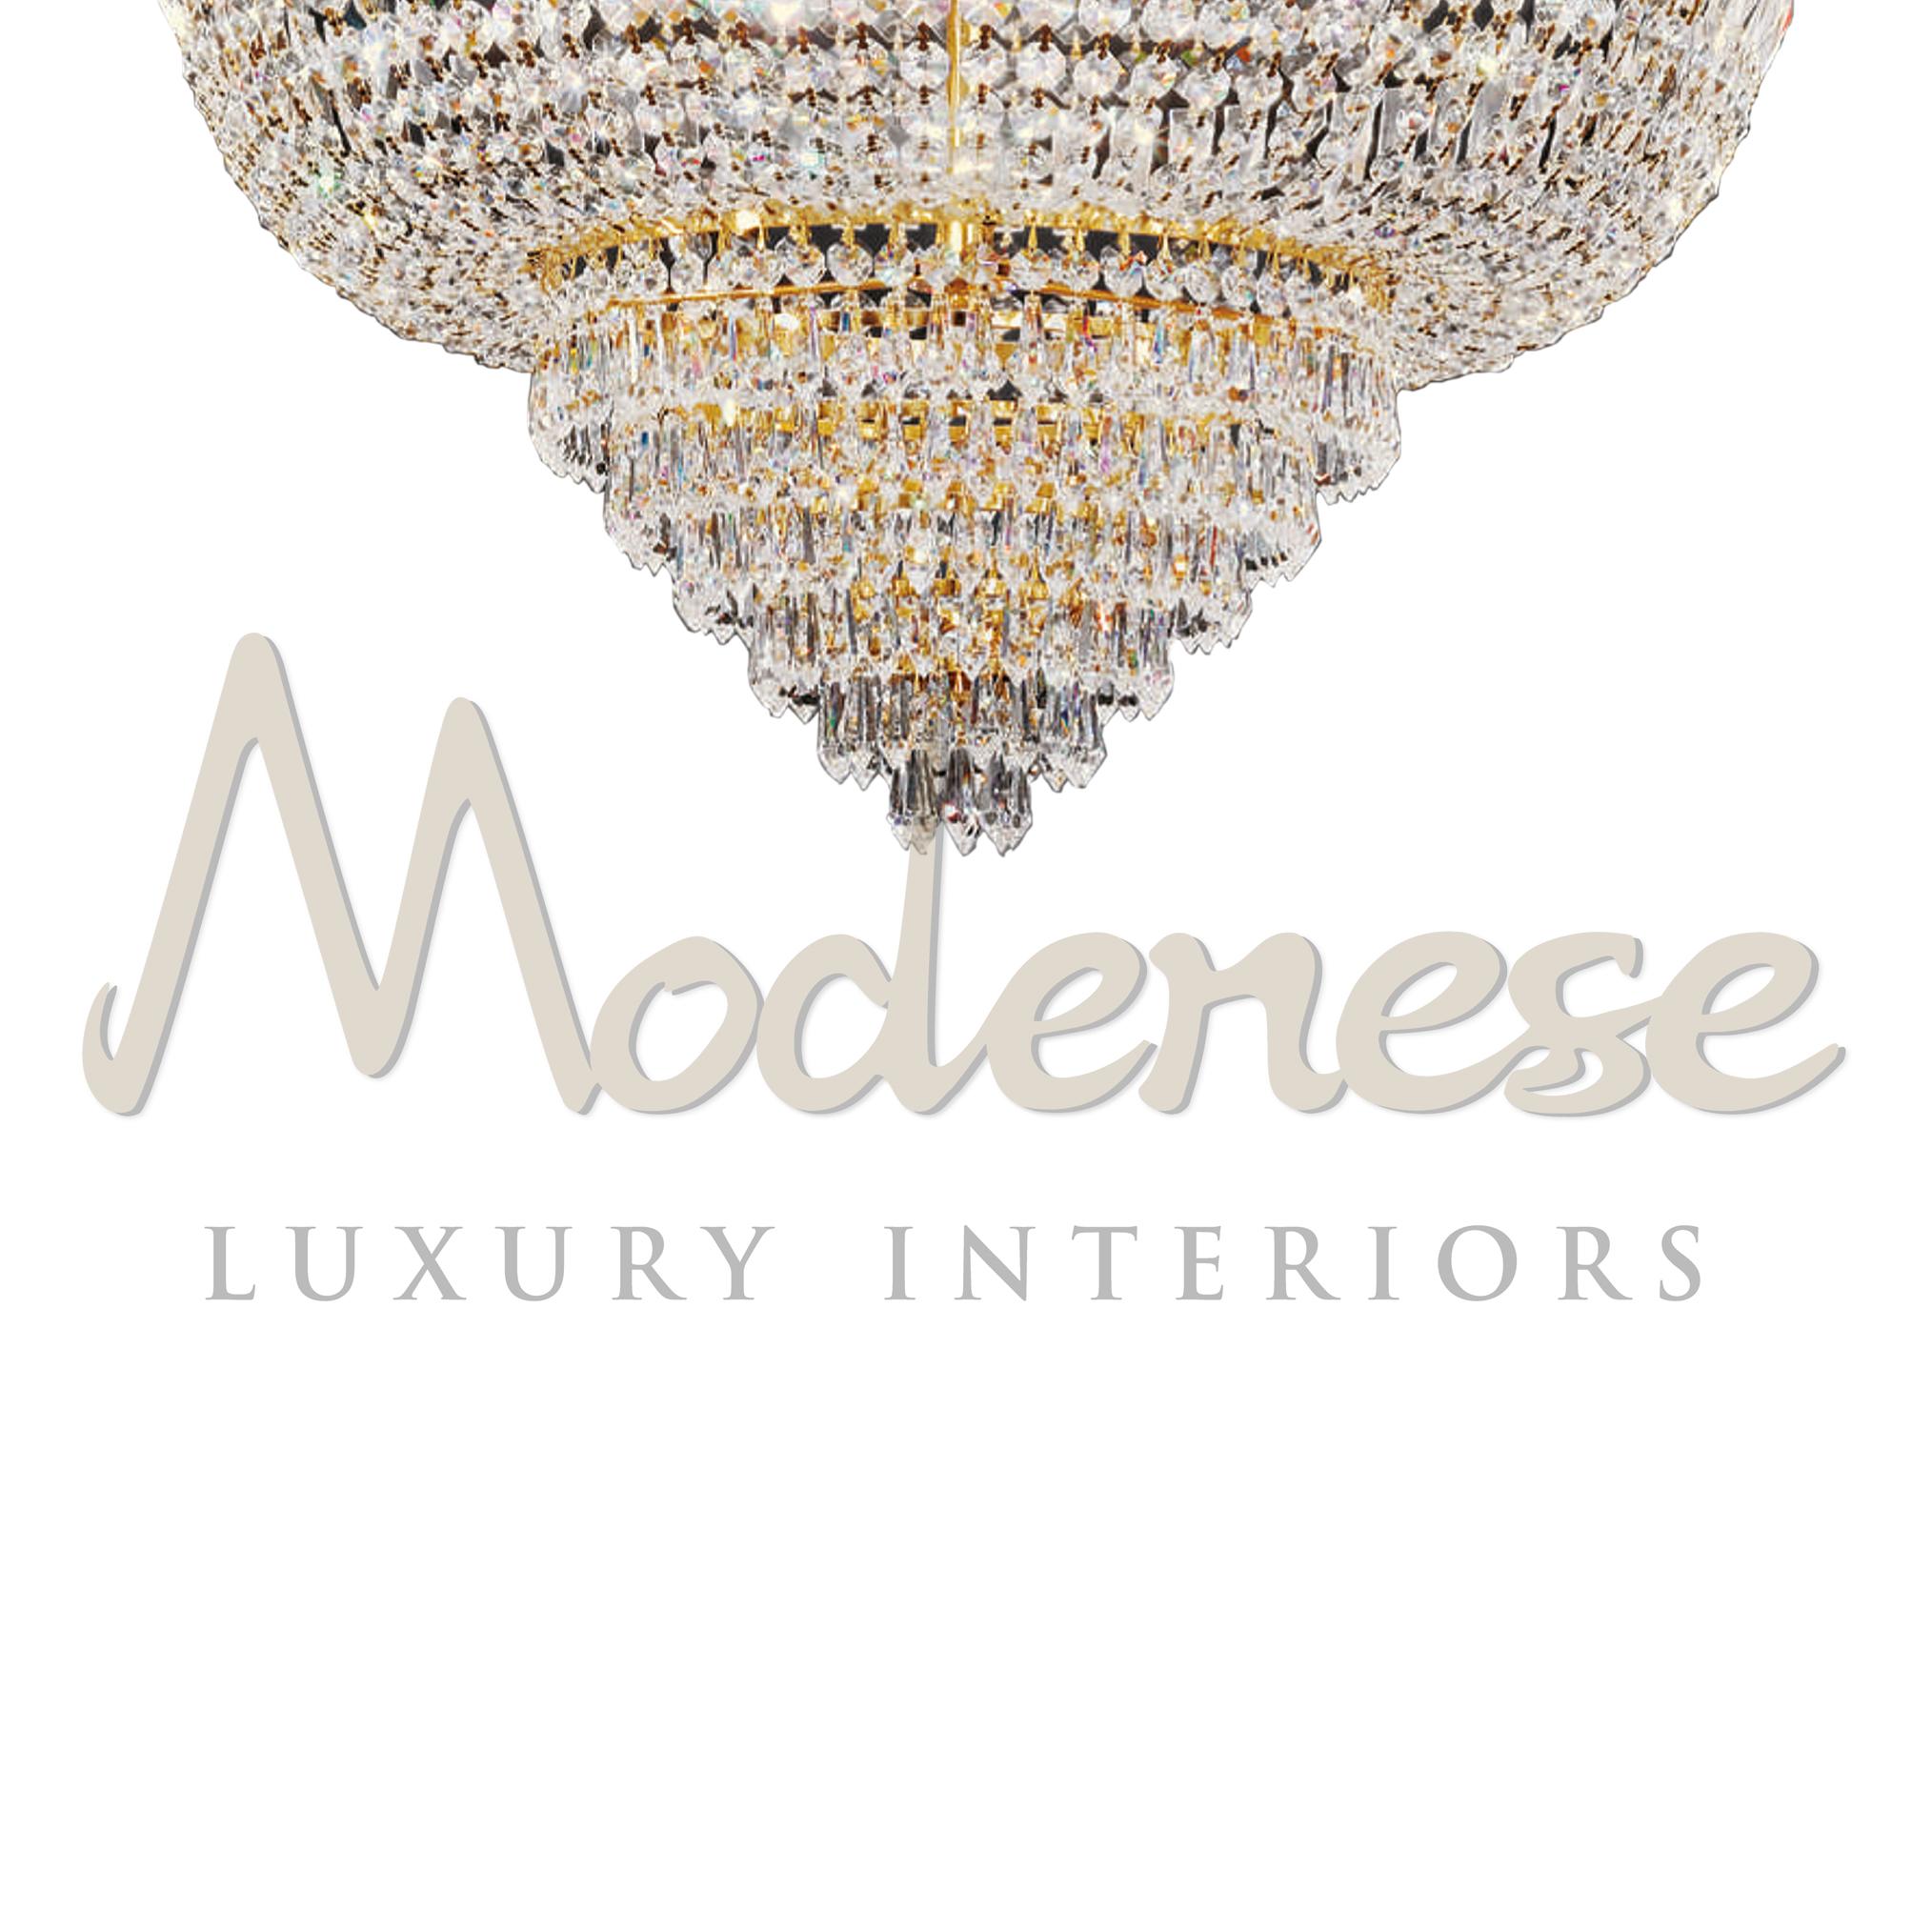 The advantage of this ceiling lamp is not only the pleasant light it emits but also the decorative appearance of its 24kt gold plated structure and crystals. This model requires 8 single E14 screw fit light bulbs (40Watt max).
 